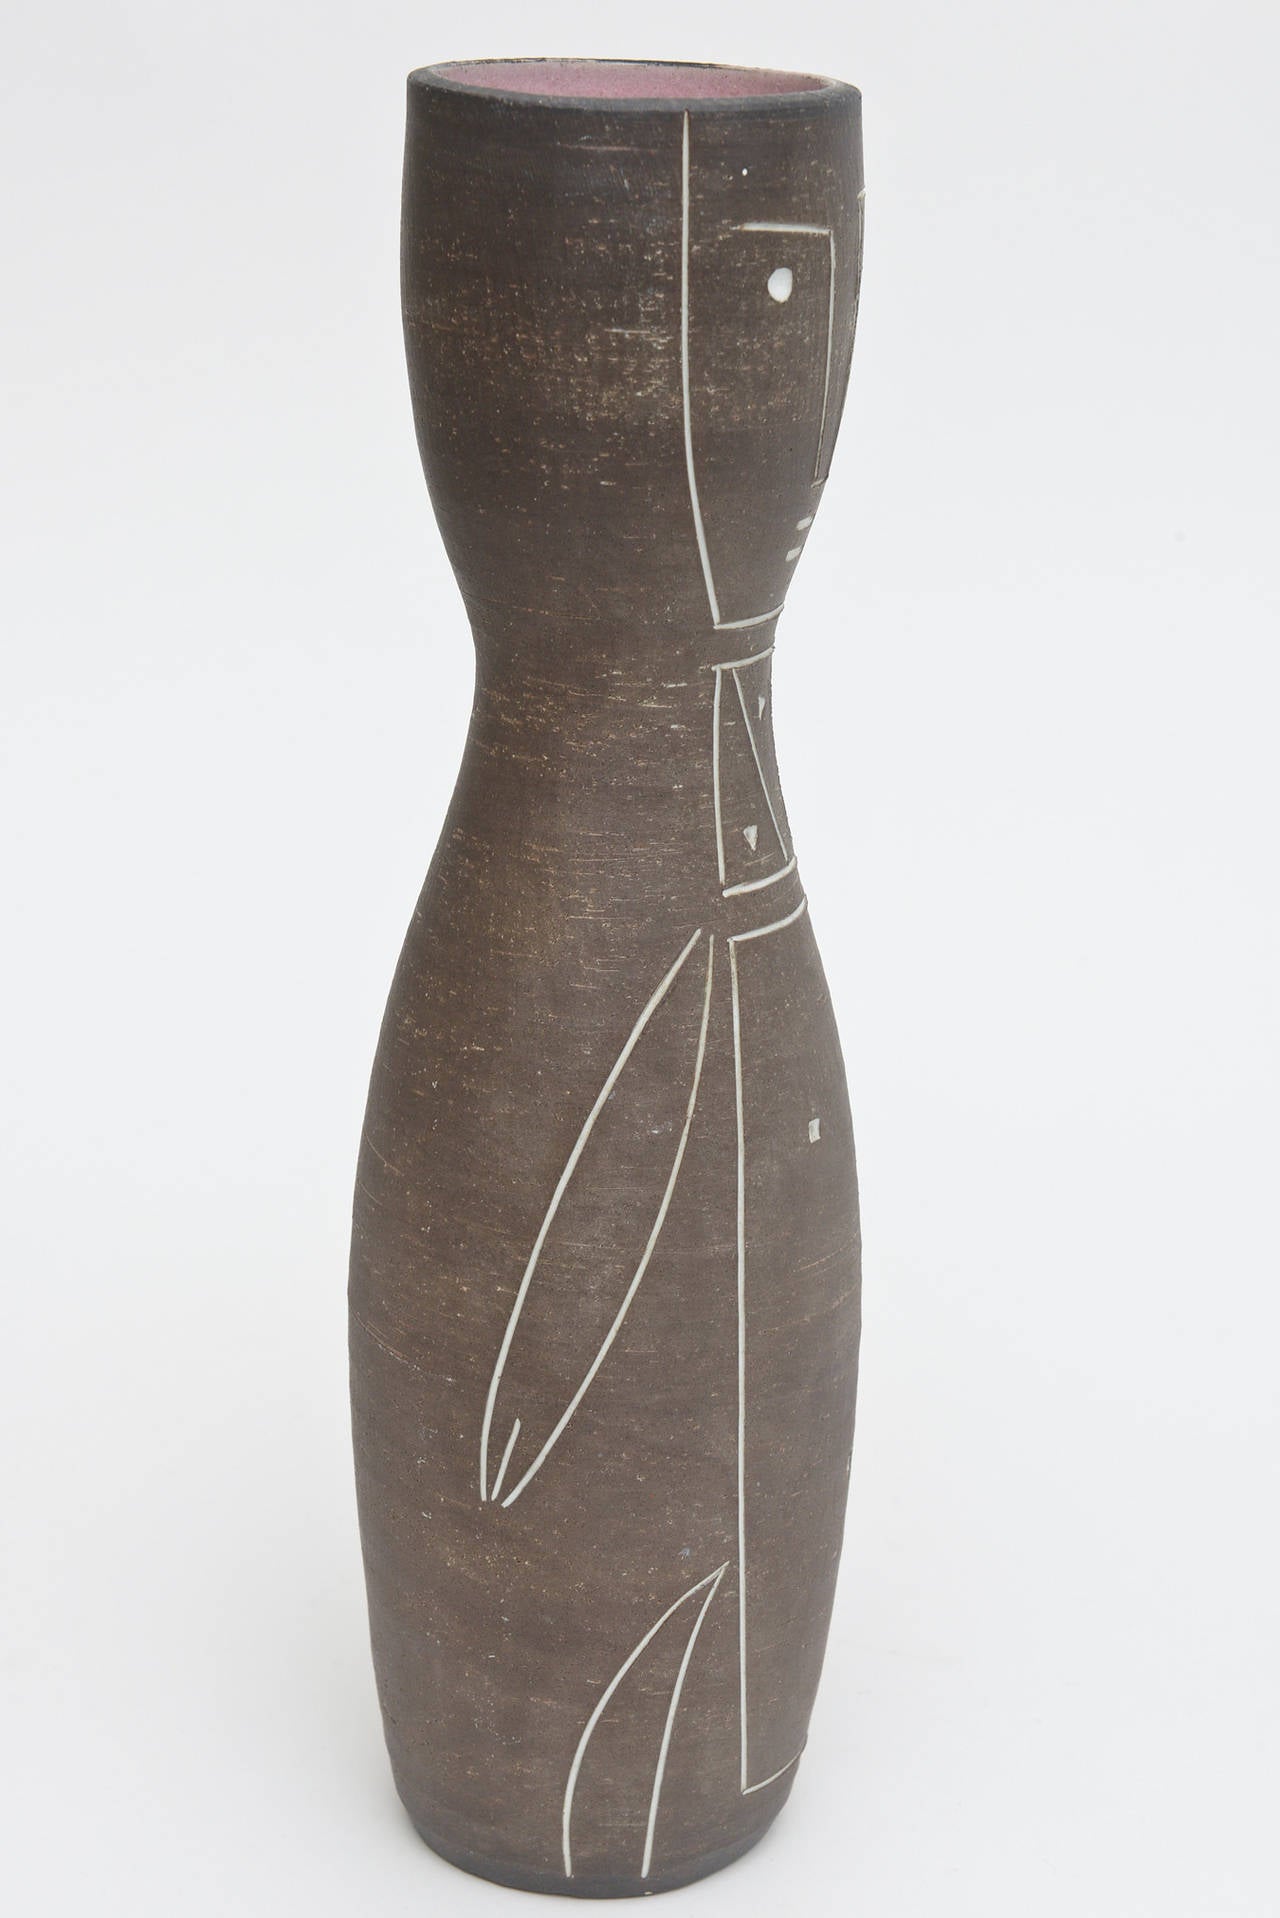 Primitive meets linear meets Miro influence in this Mid-Century ceramic vessel or vase sculpture. The dusty rose glaze on the inside makes a good contrast to the light brown background. With incised white lines. It is signed on the bottom but not